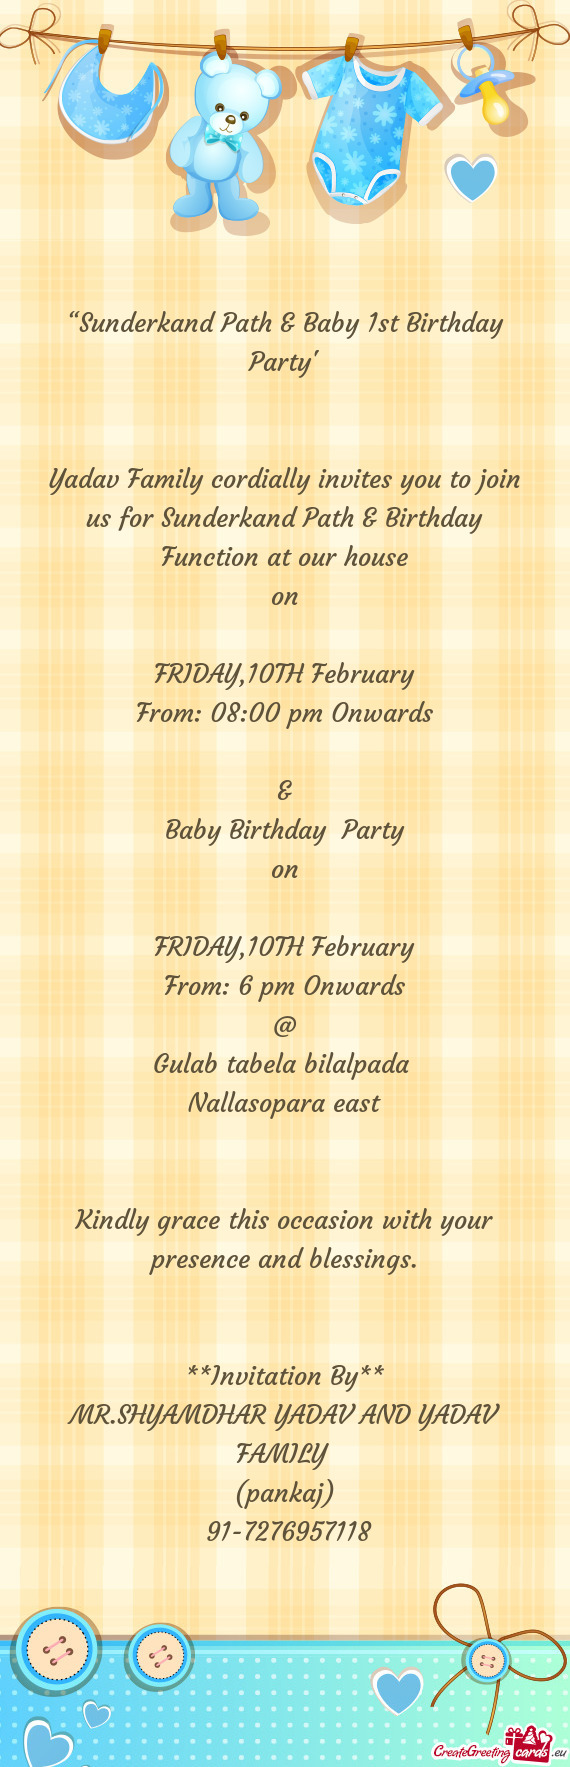 Yadav Family cordially invites you to join us for Sunderkand Path & Birthday Function at our house